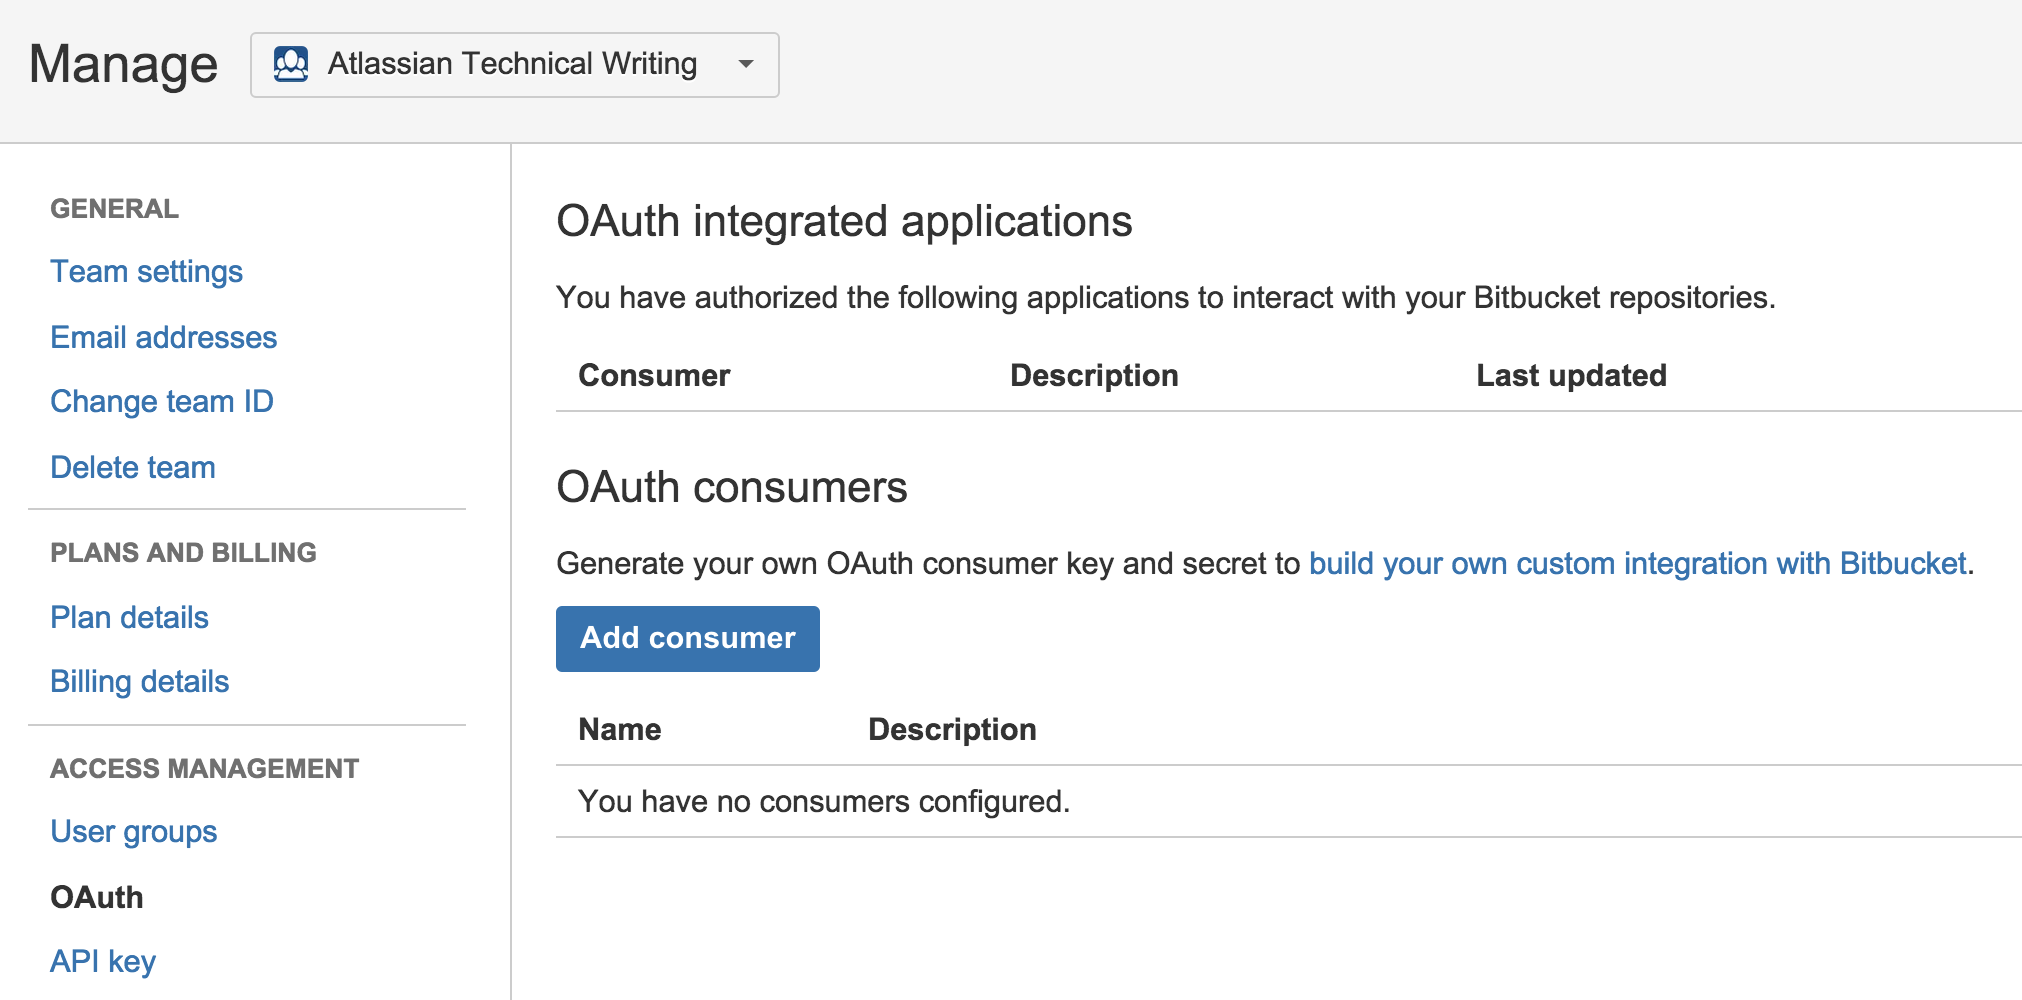 [OAuth integrated applications] ページ。